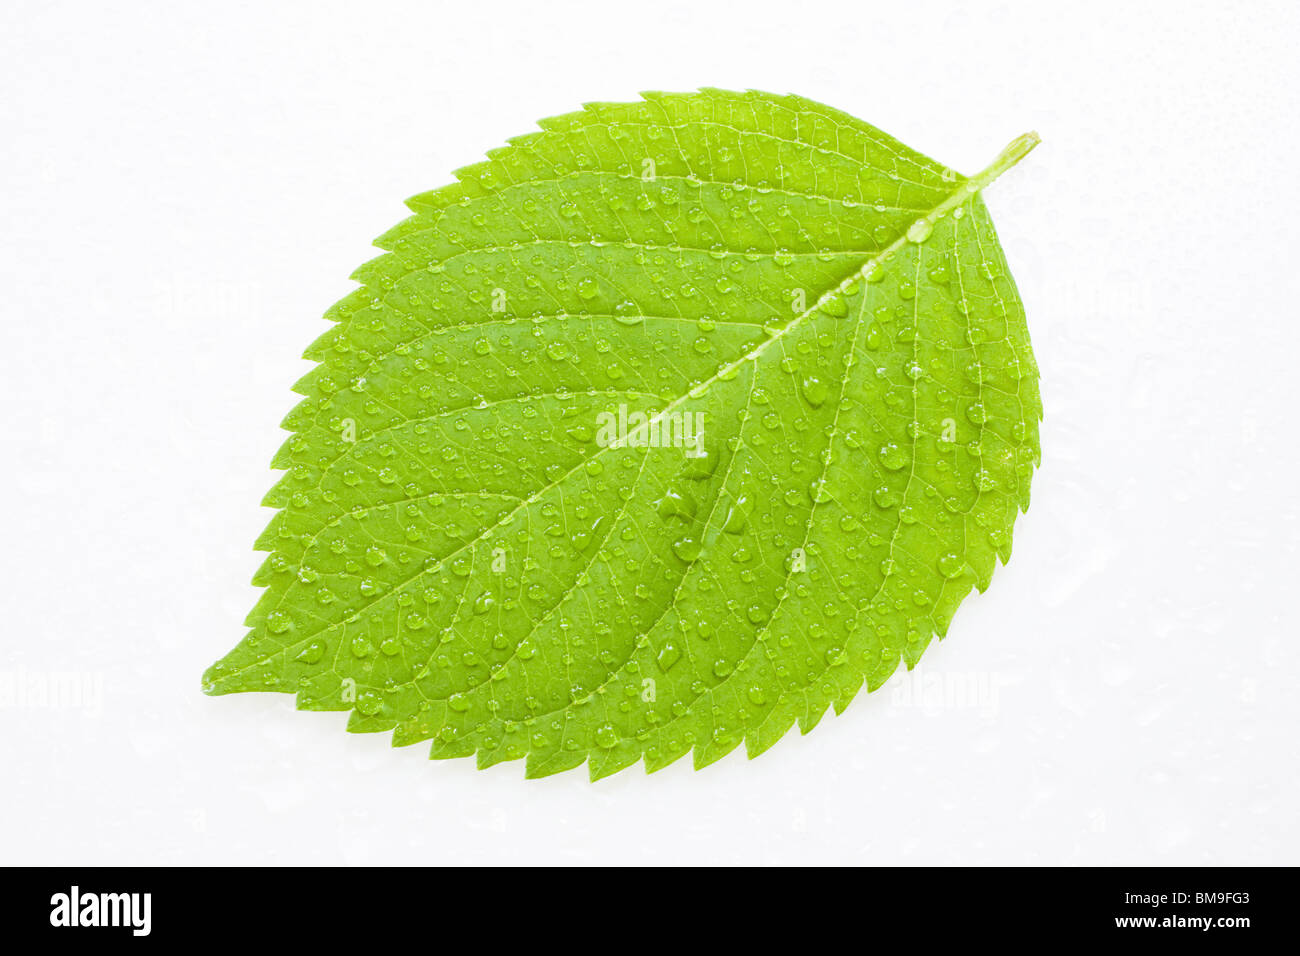 Green leaf with water drops, close up, white background Stock Photo